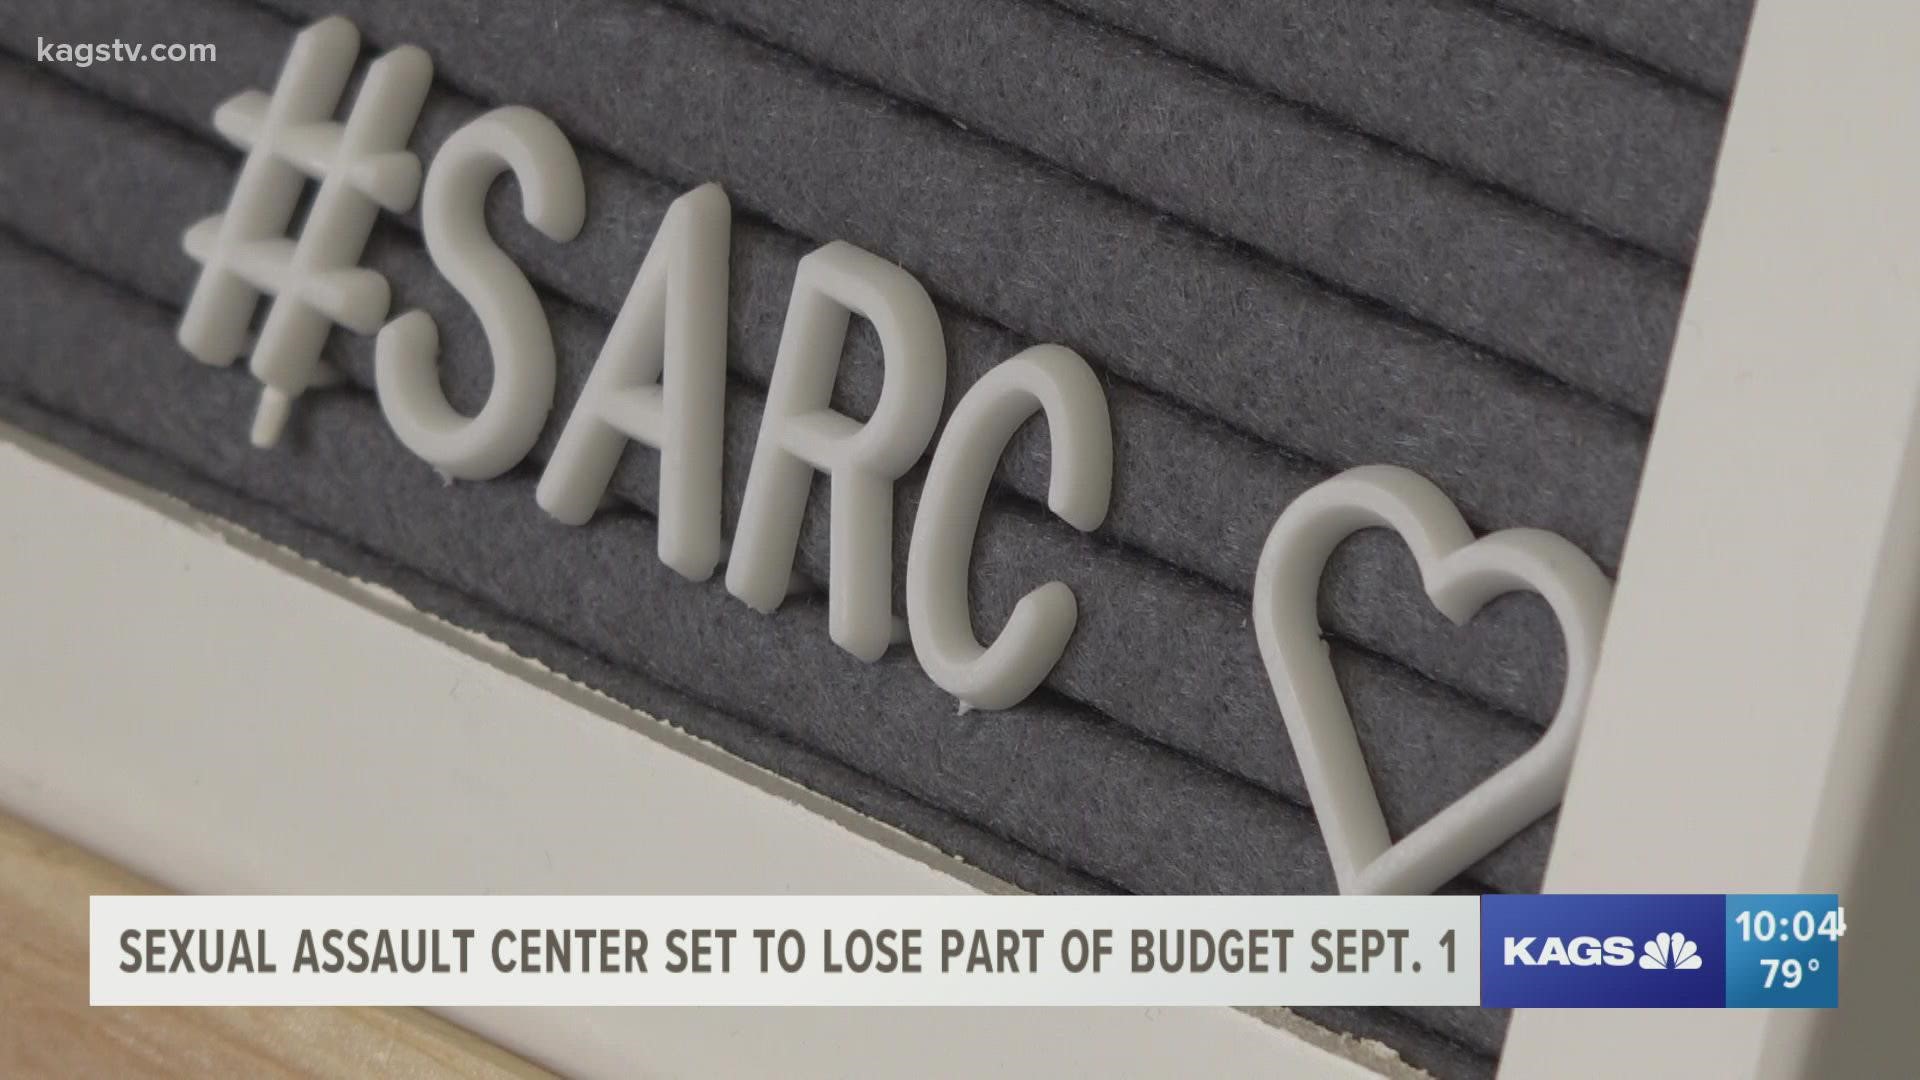 Due to the pandemic, SARC's federal and state grants will no longer be funded.